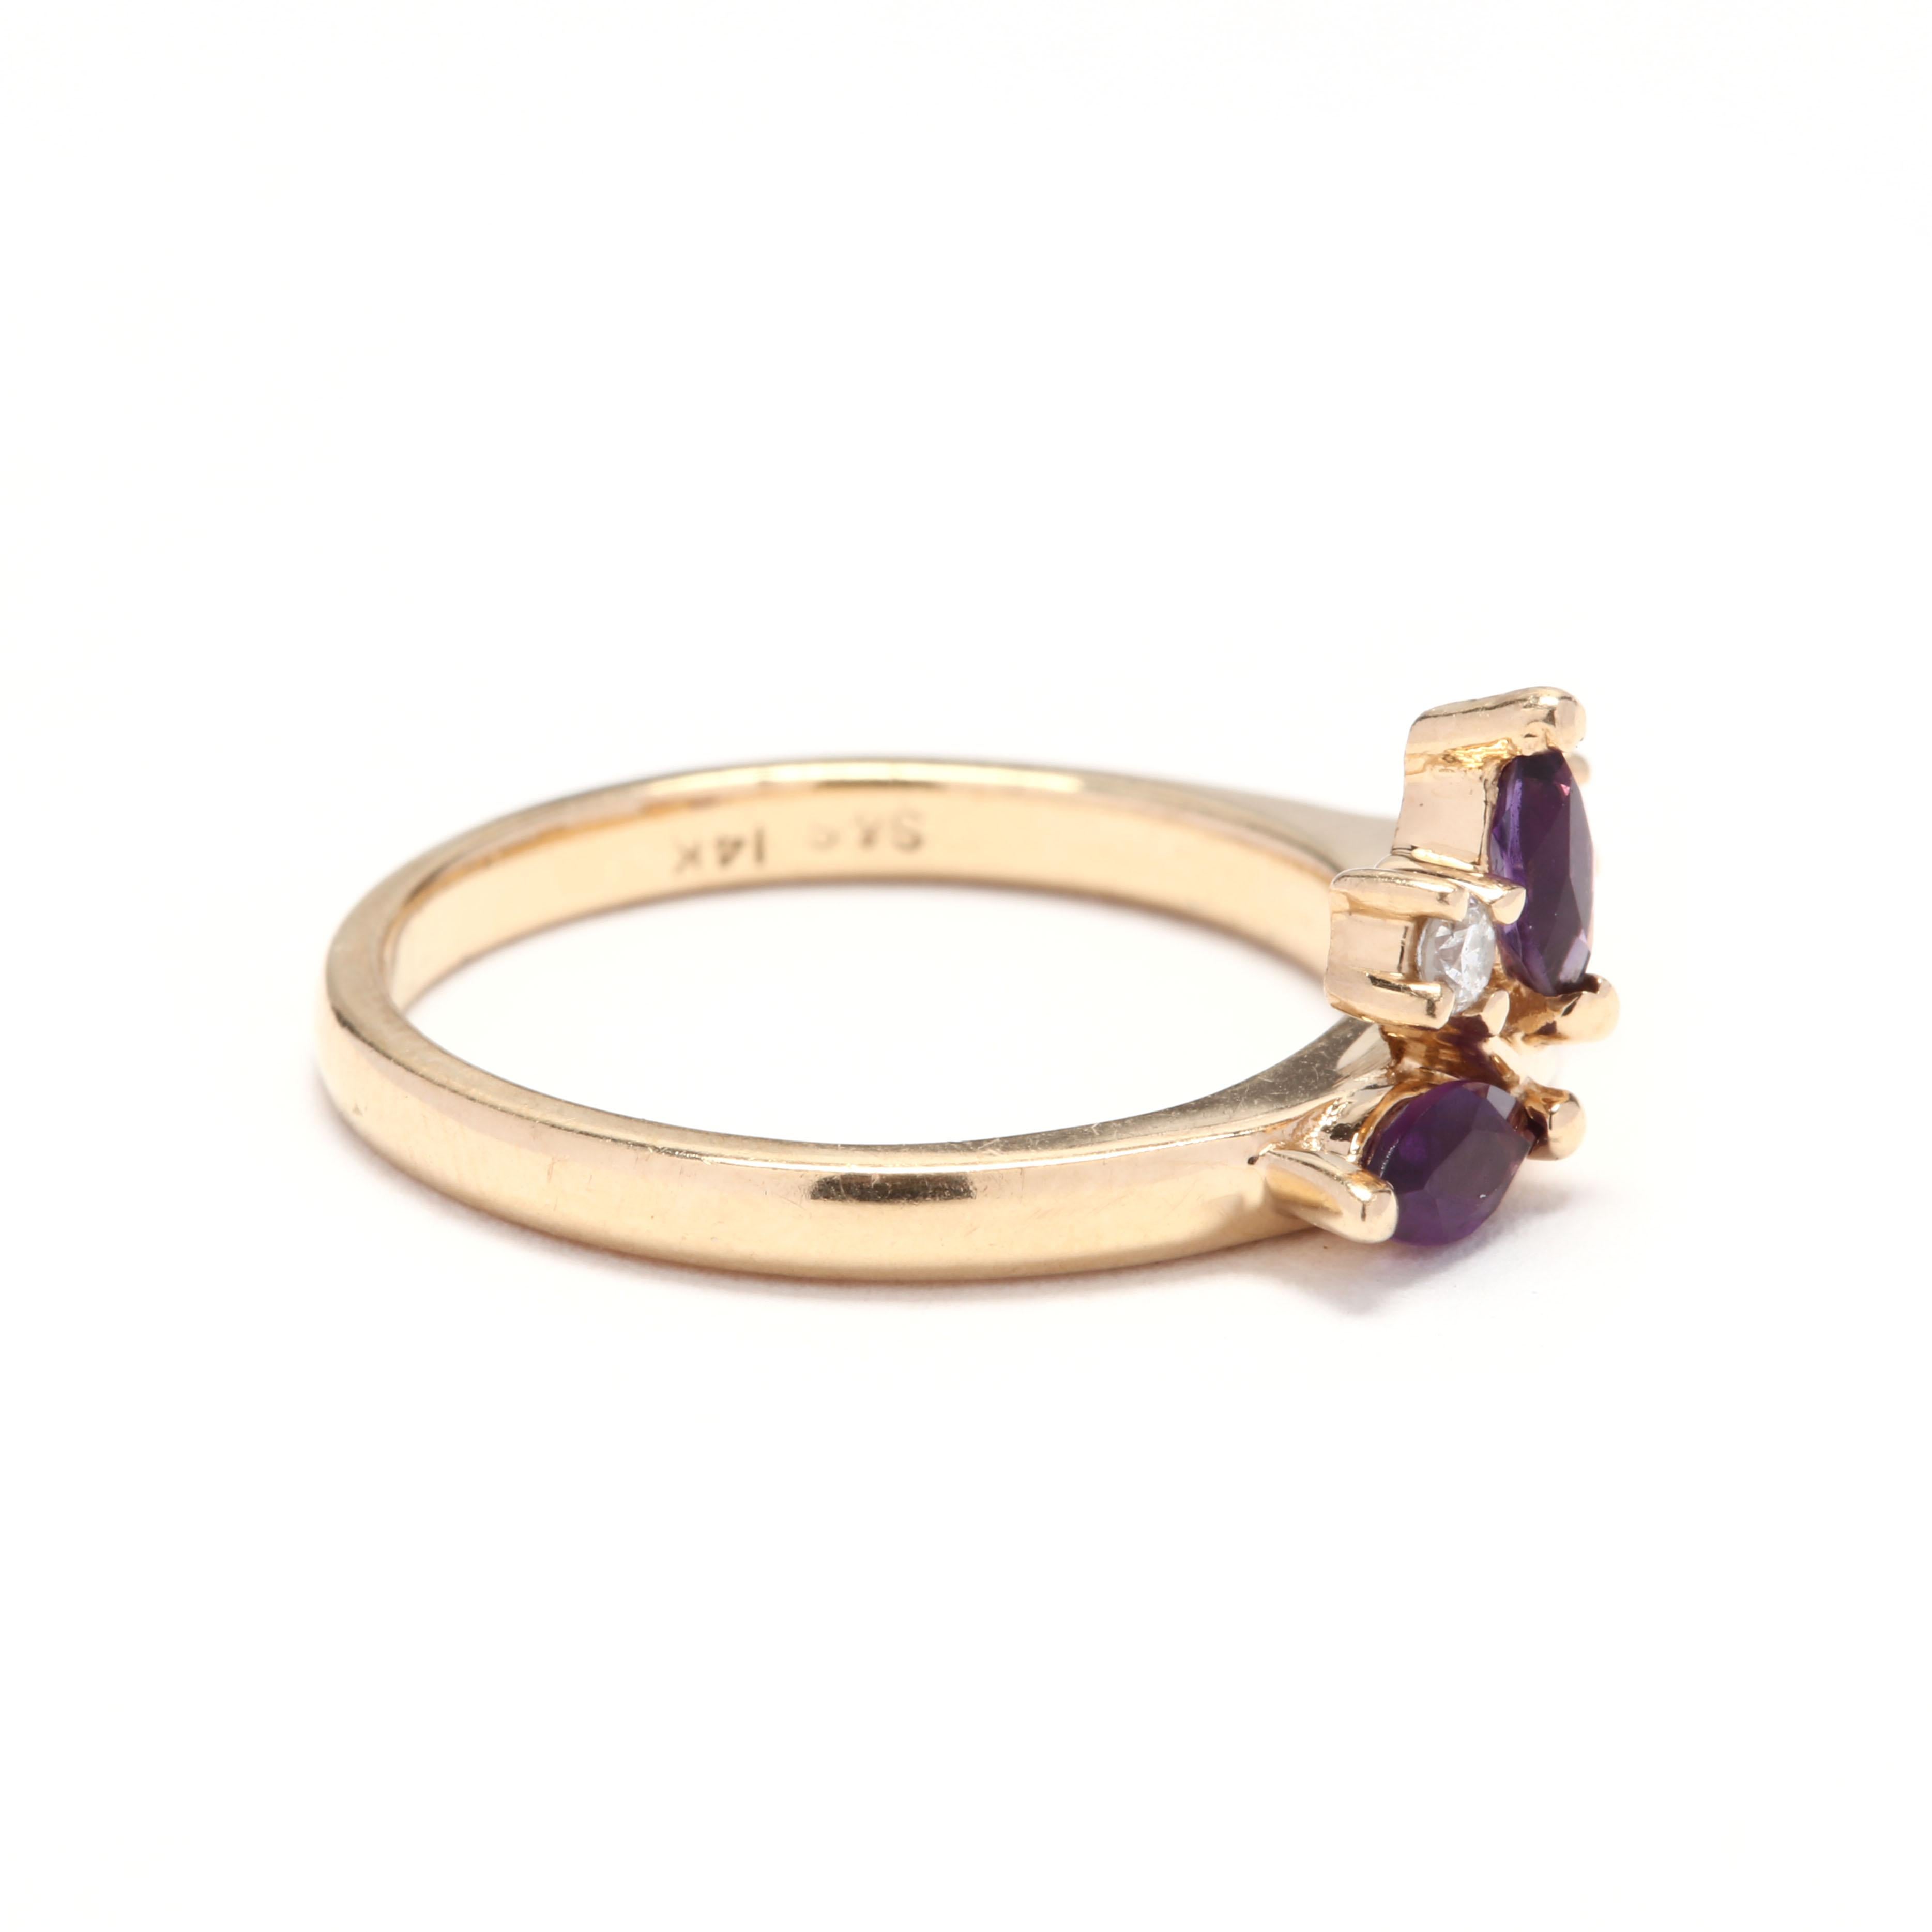 A vintage 14 karat yellow gold, amethyst and diamond vine ring. In a vine bypass design set with two marquise cut amethysts and two full cut round diamonds. The perfect complement to a solitaire ring.  February birthstone band with a unique look